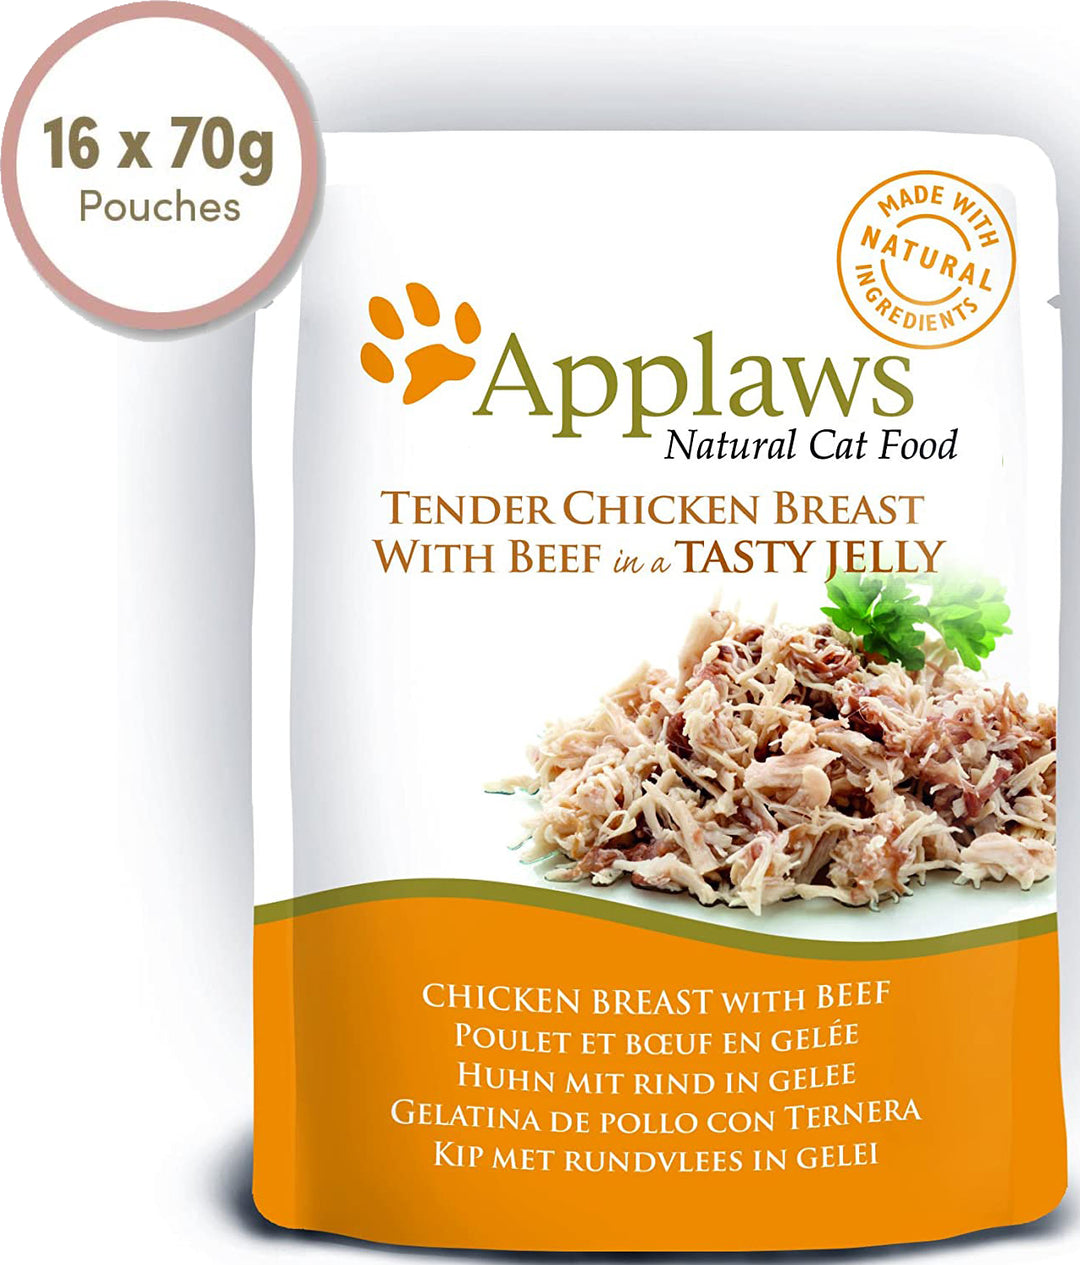 Applaws Pouches Tender Chicken Breast with Beef in tasty Jelly (1 box, 16 pcs)